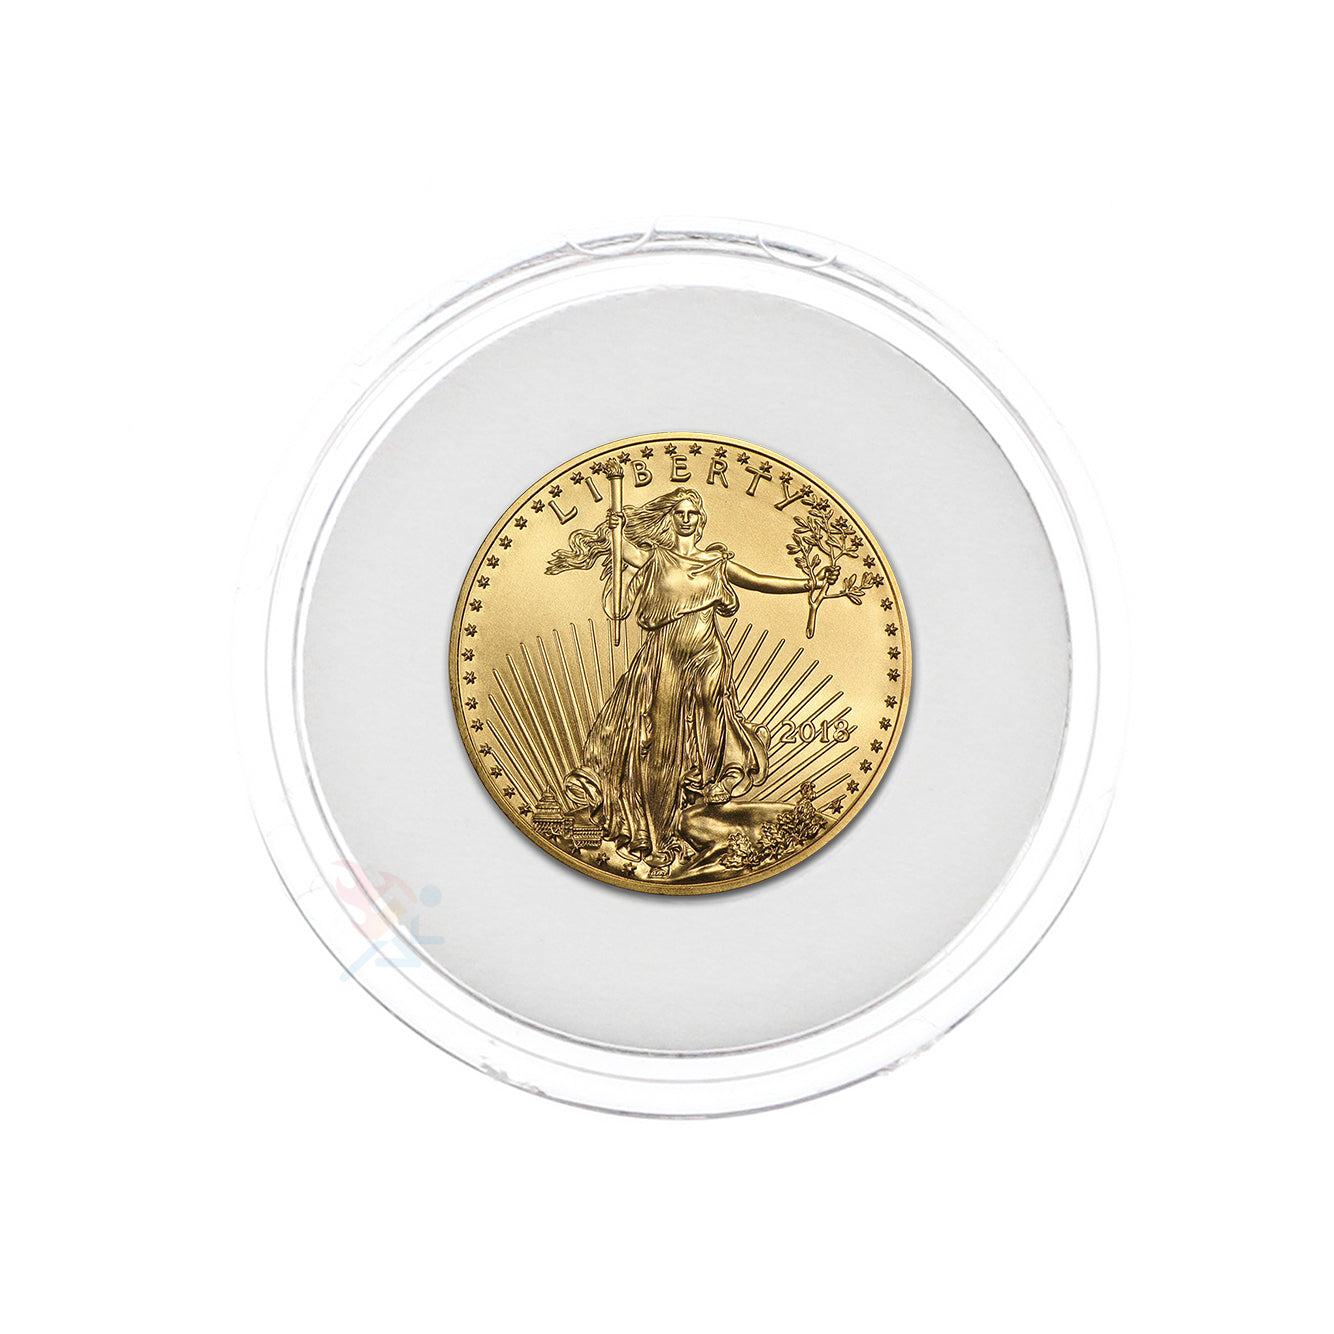 Air-Tite 16mm Coin Holders for 1/10oz Gold Eagles